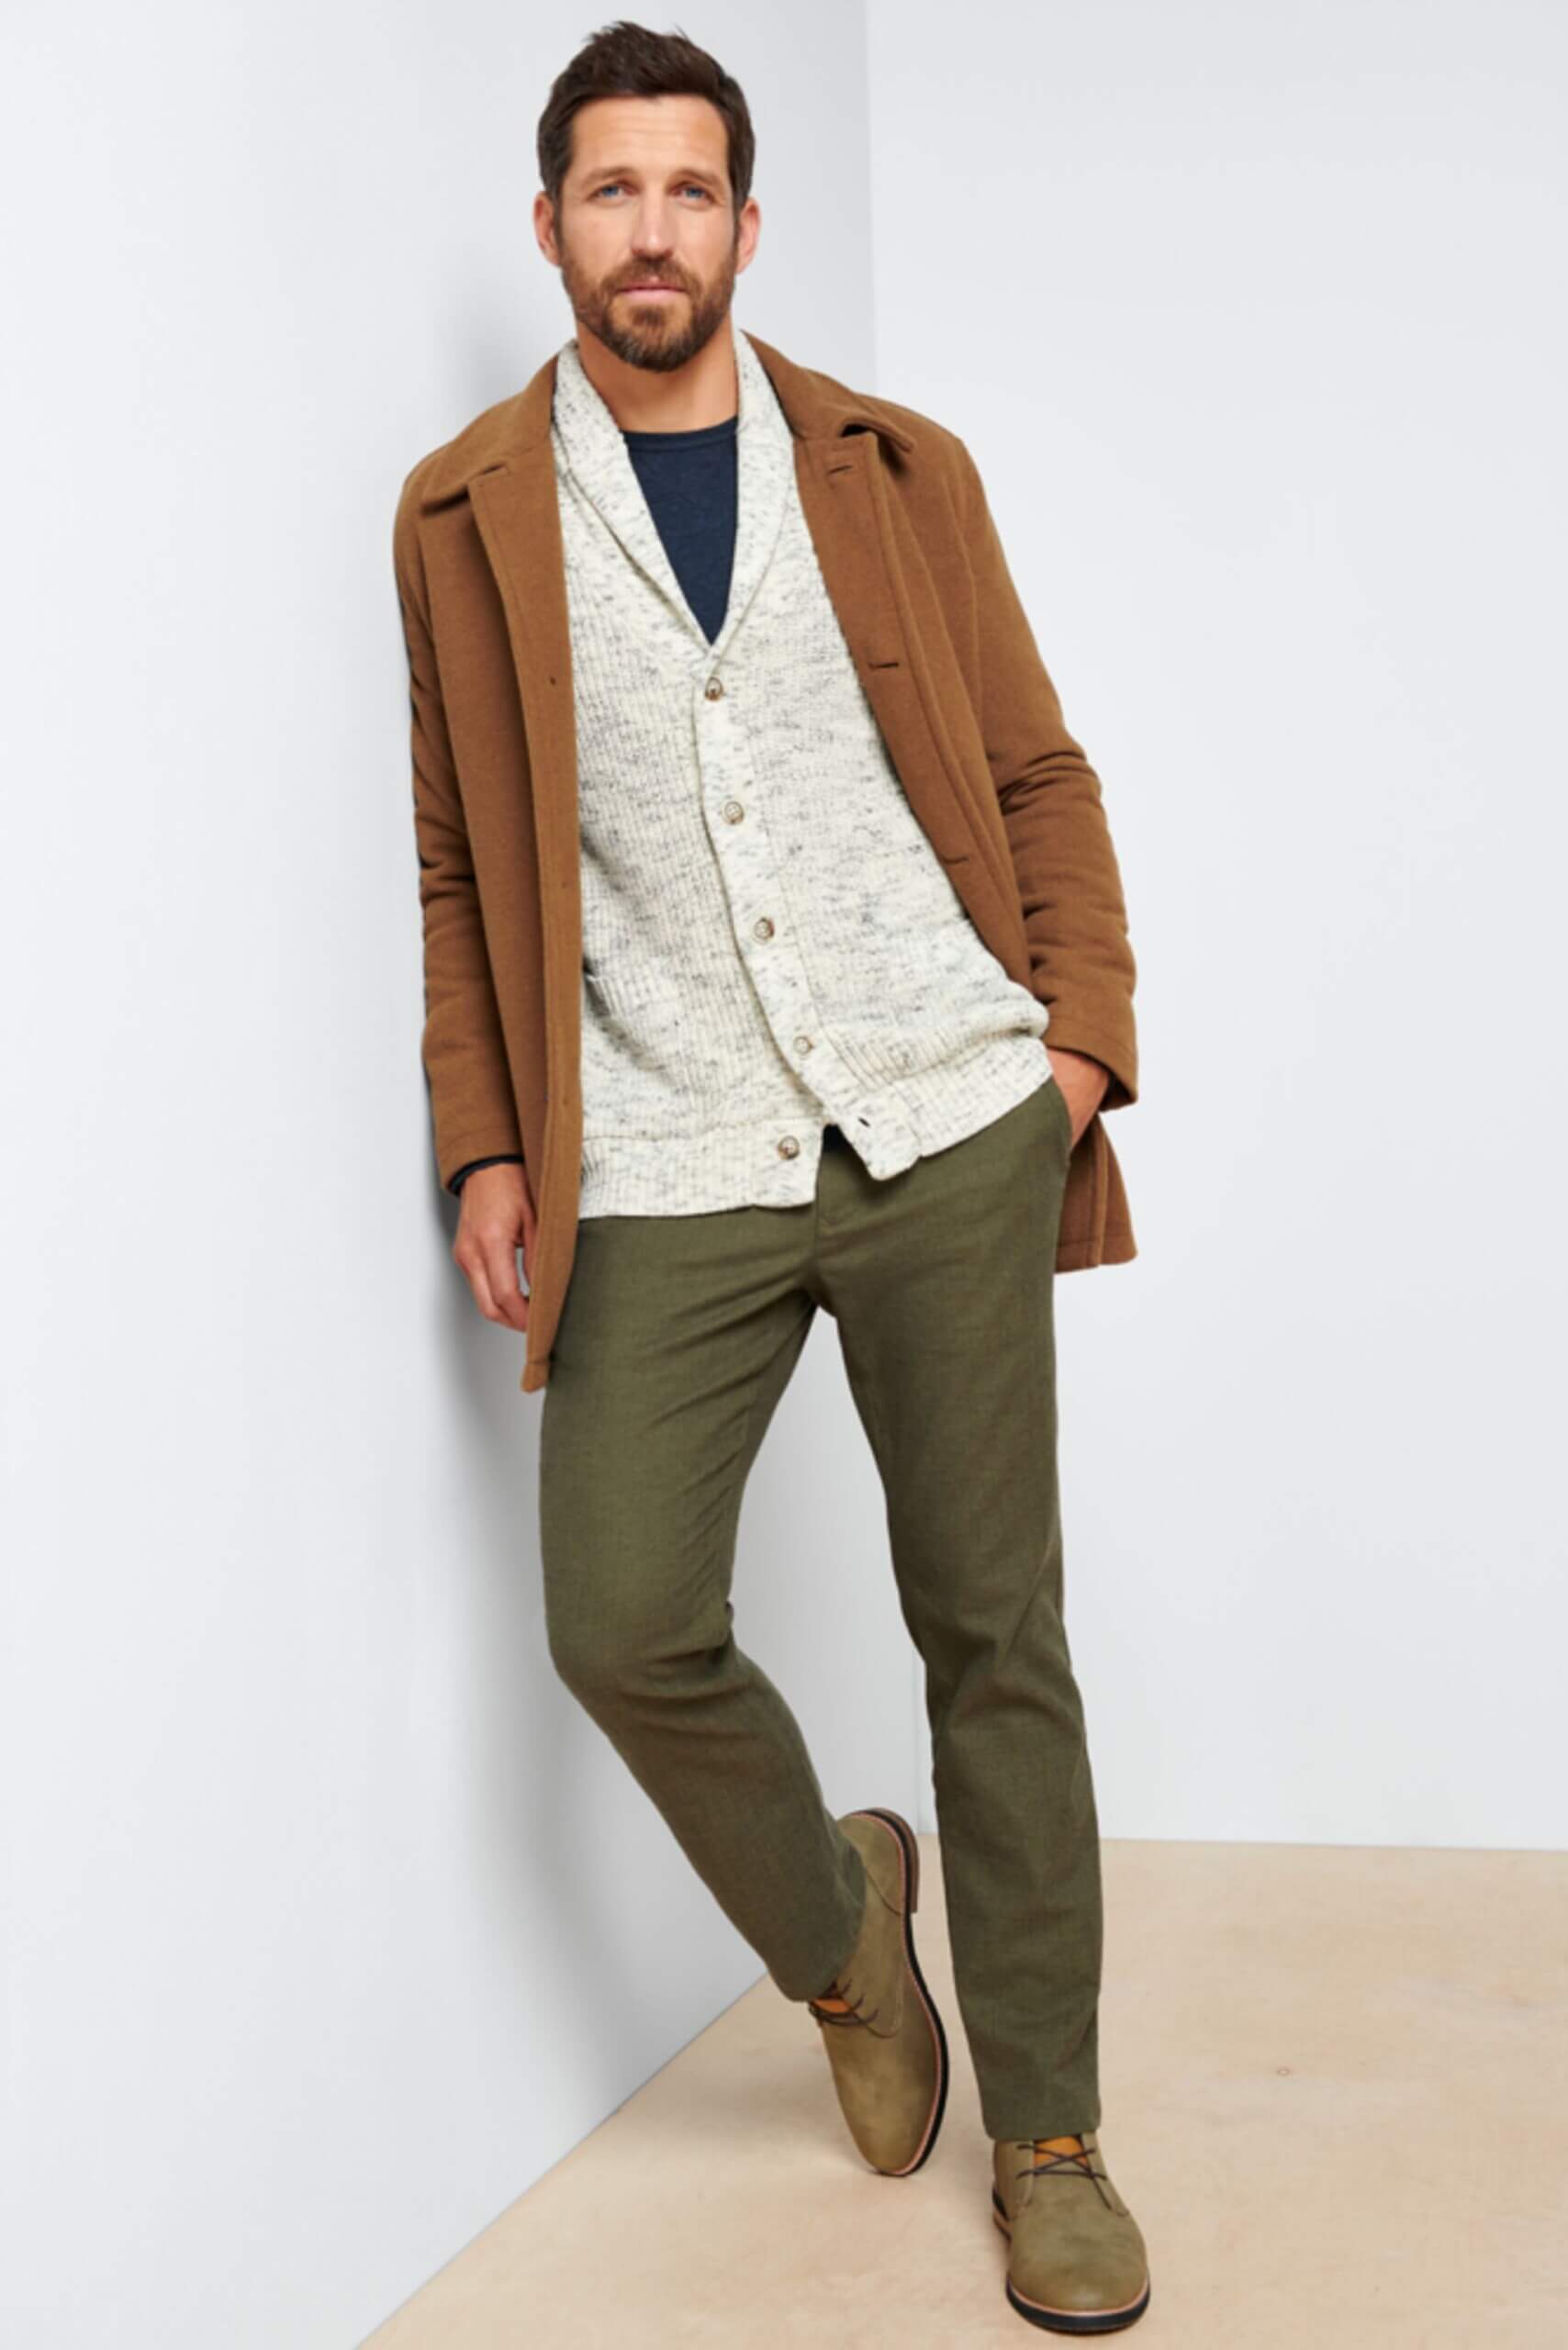 How to Wear Cardigans for Men | Style Guide | Stitch Fix